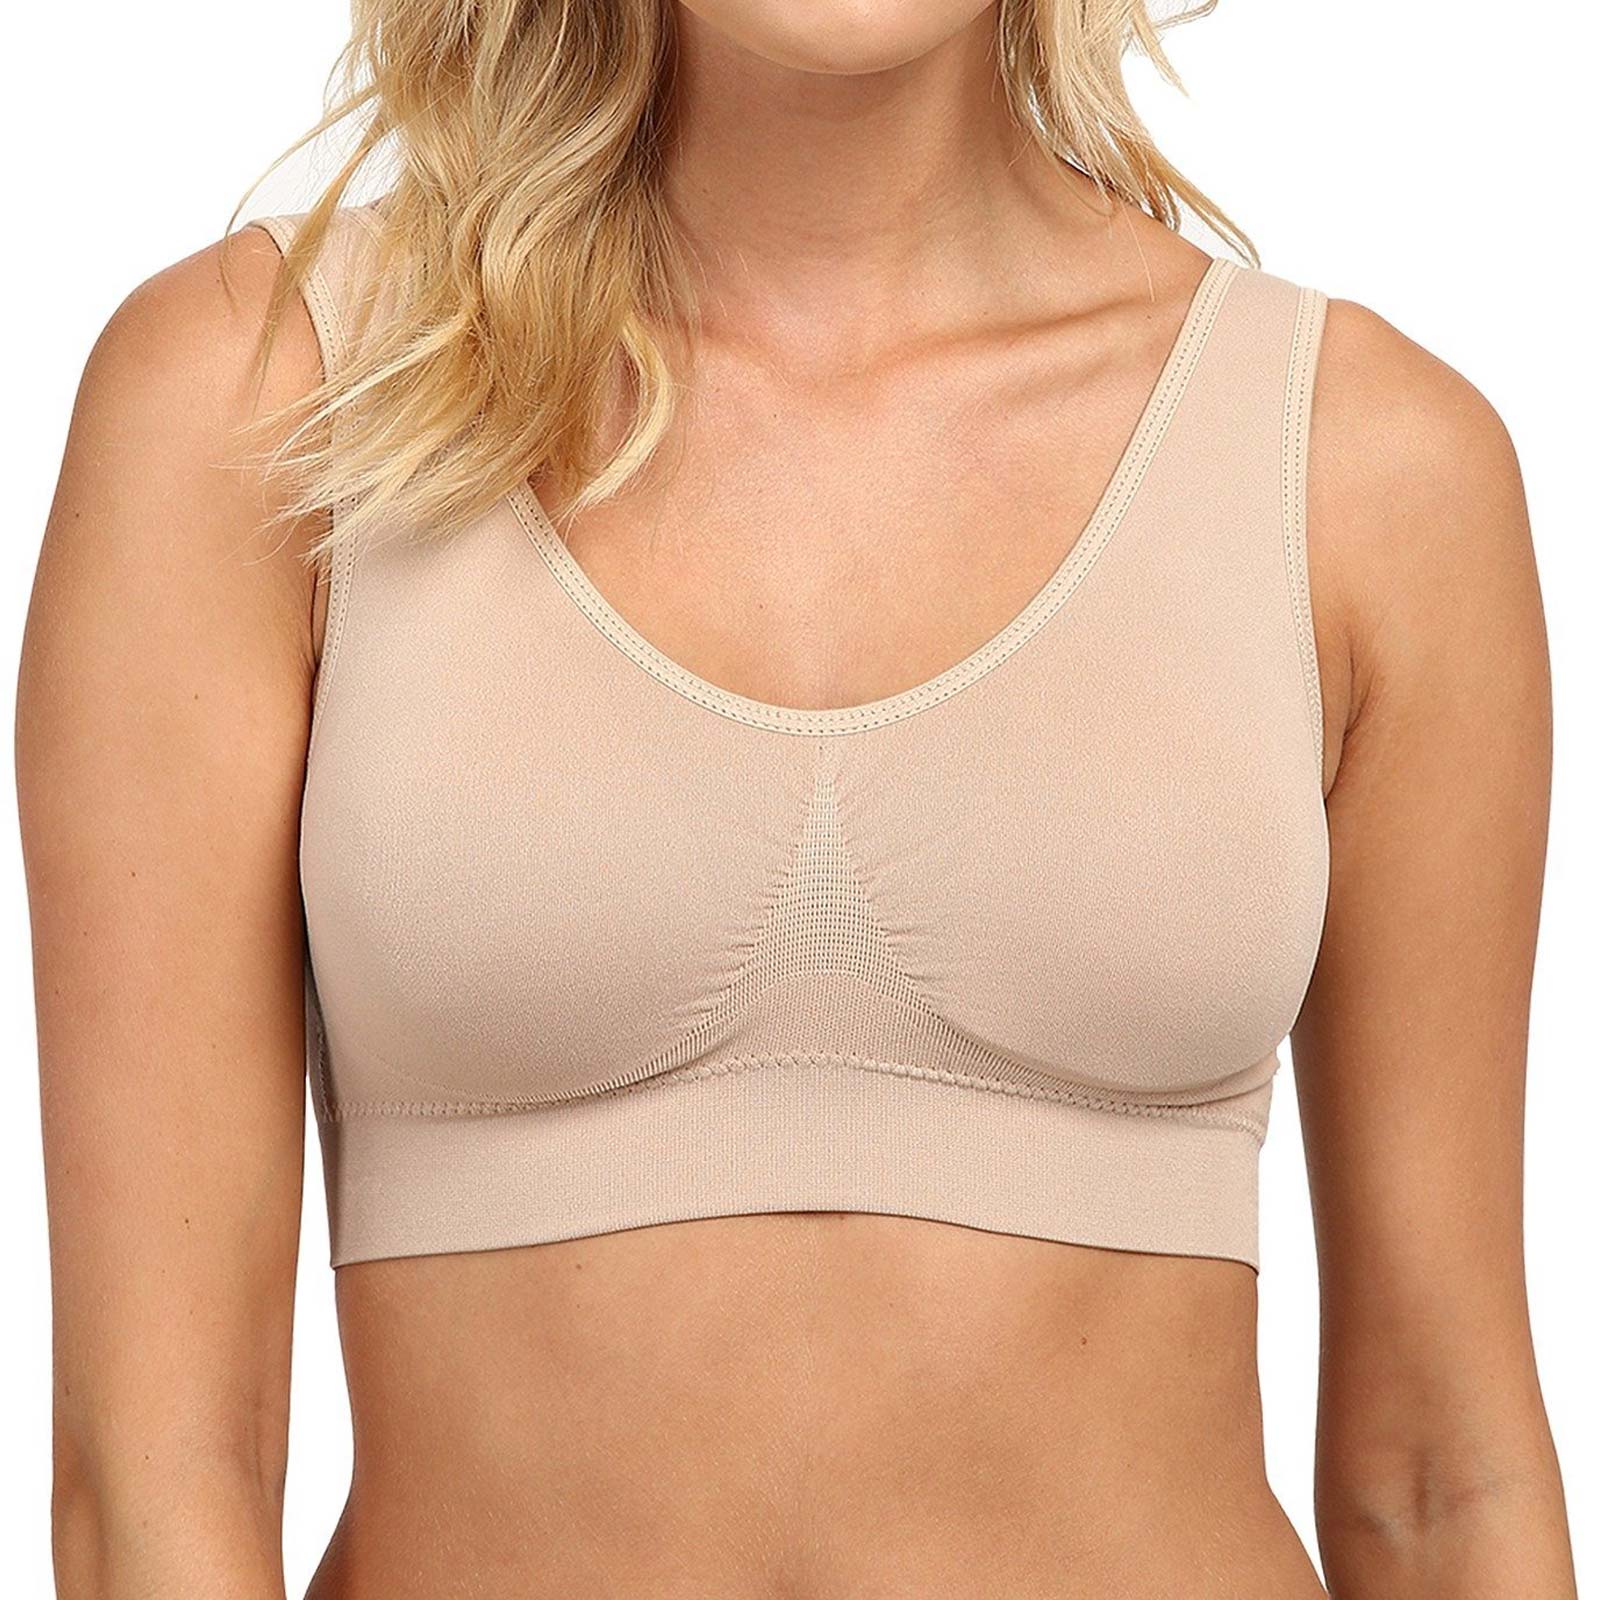 3X Womens Ladies Sports Sleep Comfort Bras Full Cup Non-Wired Seamless Crop Top 